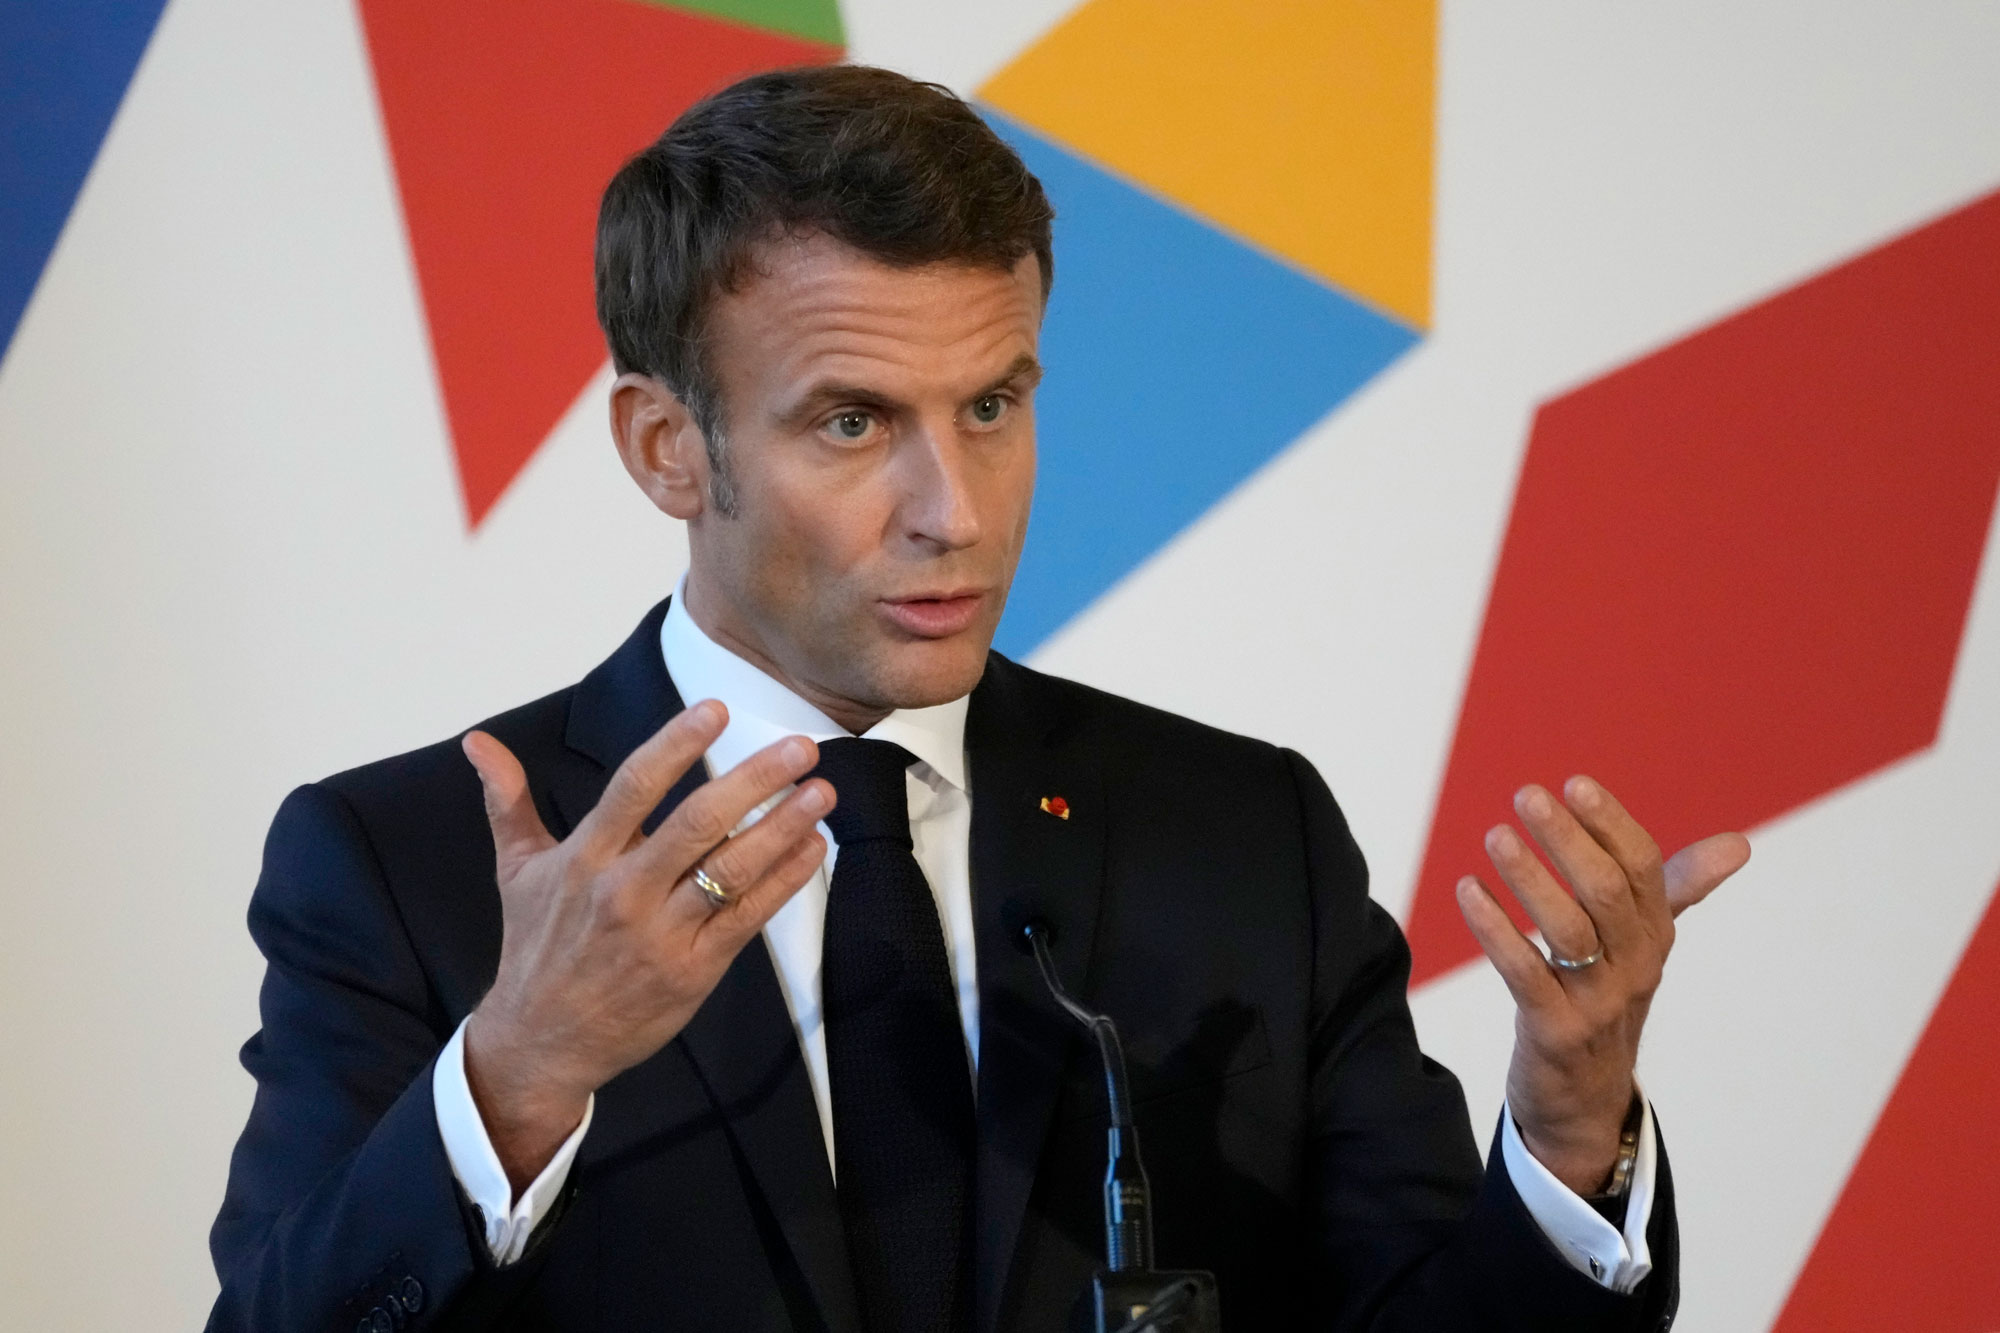 French President Emmanuel Macron speaks during a media conference at the European Union leaders' summit in Prague, Czech Republic, on Friday.